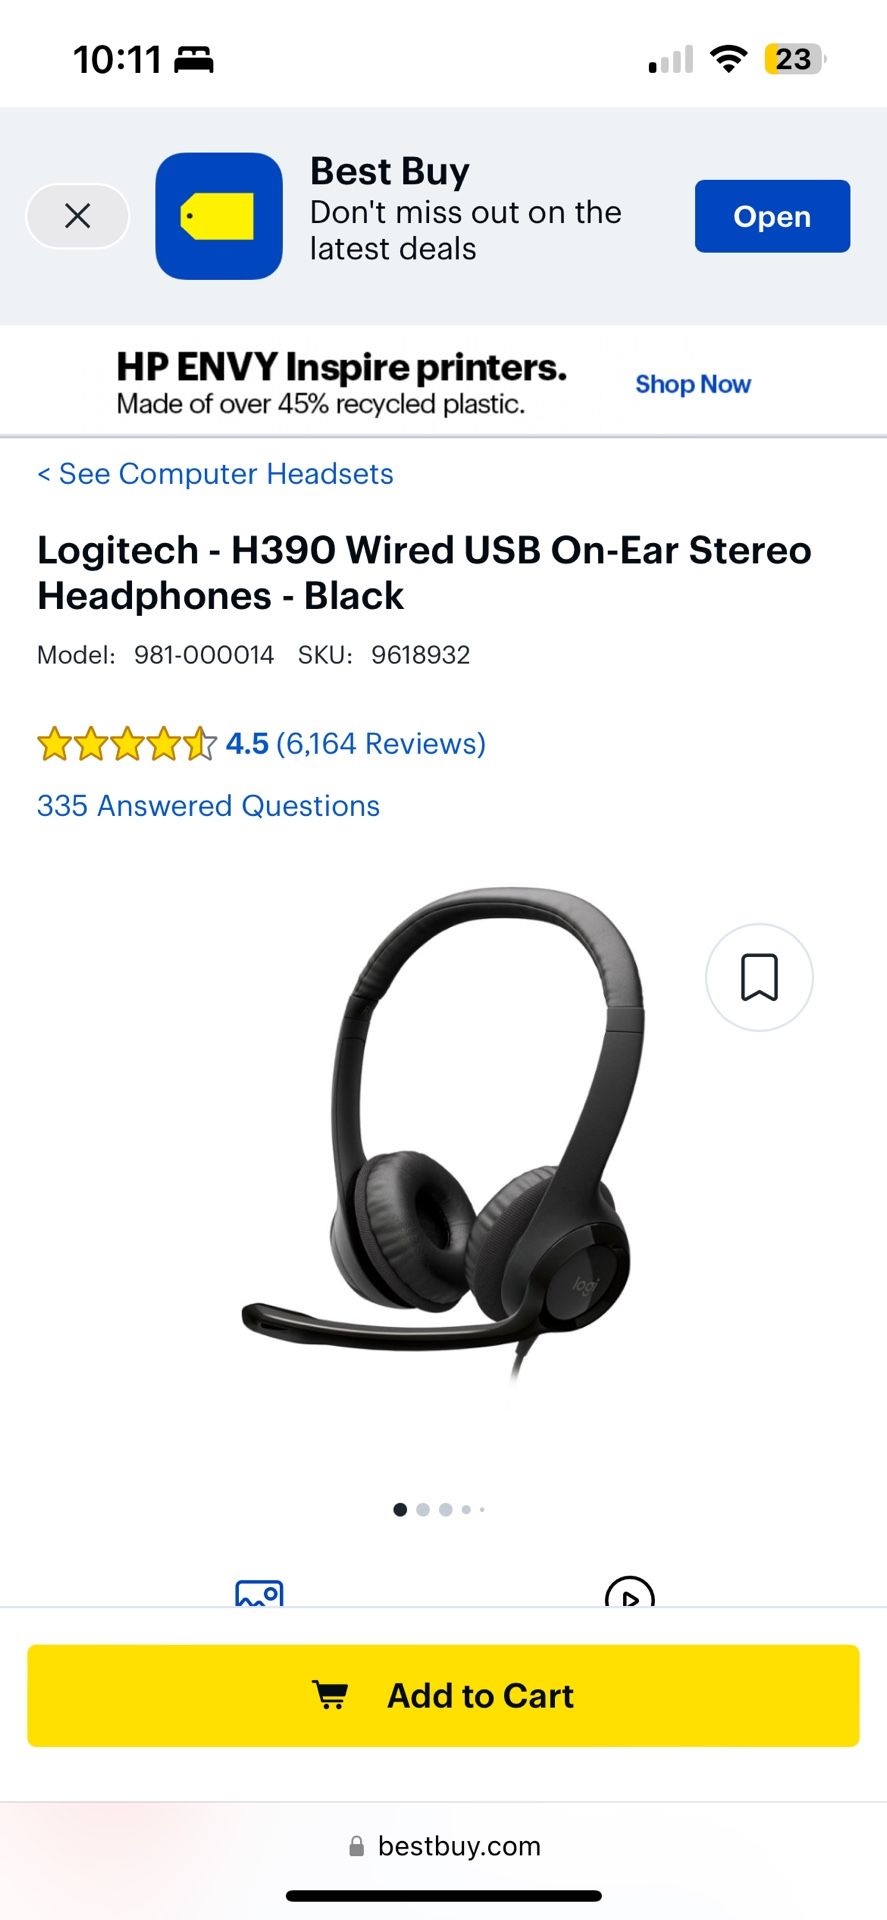 Logitech - H390 Wired USB On-Ear Stereo Headset